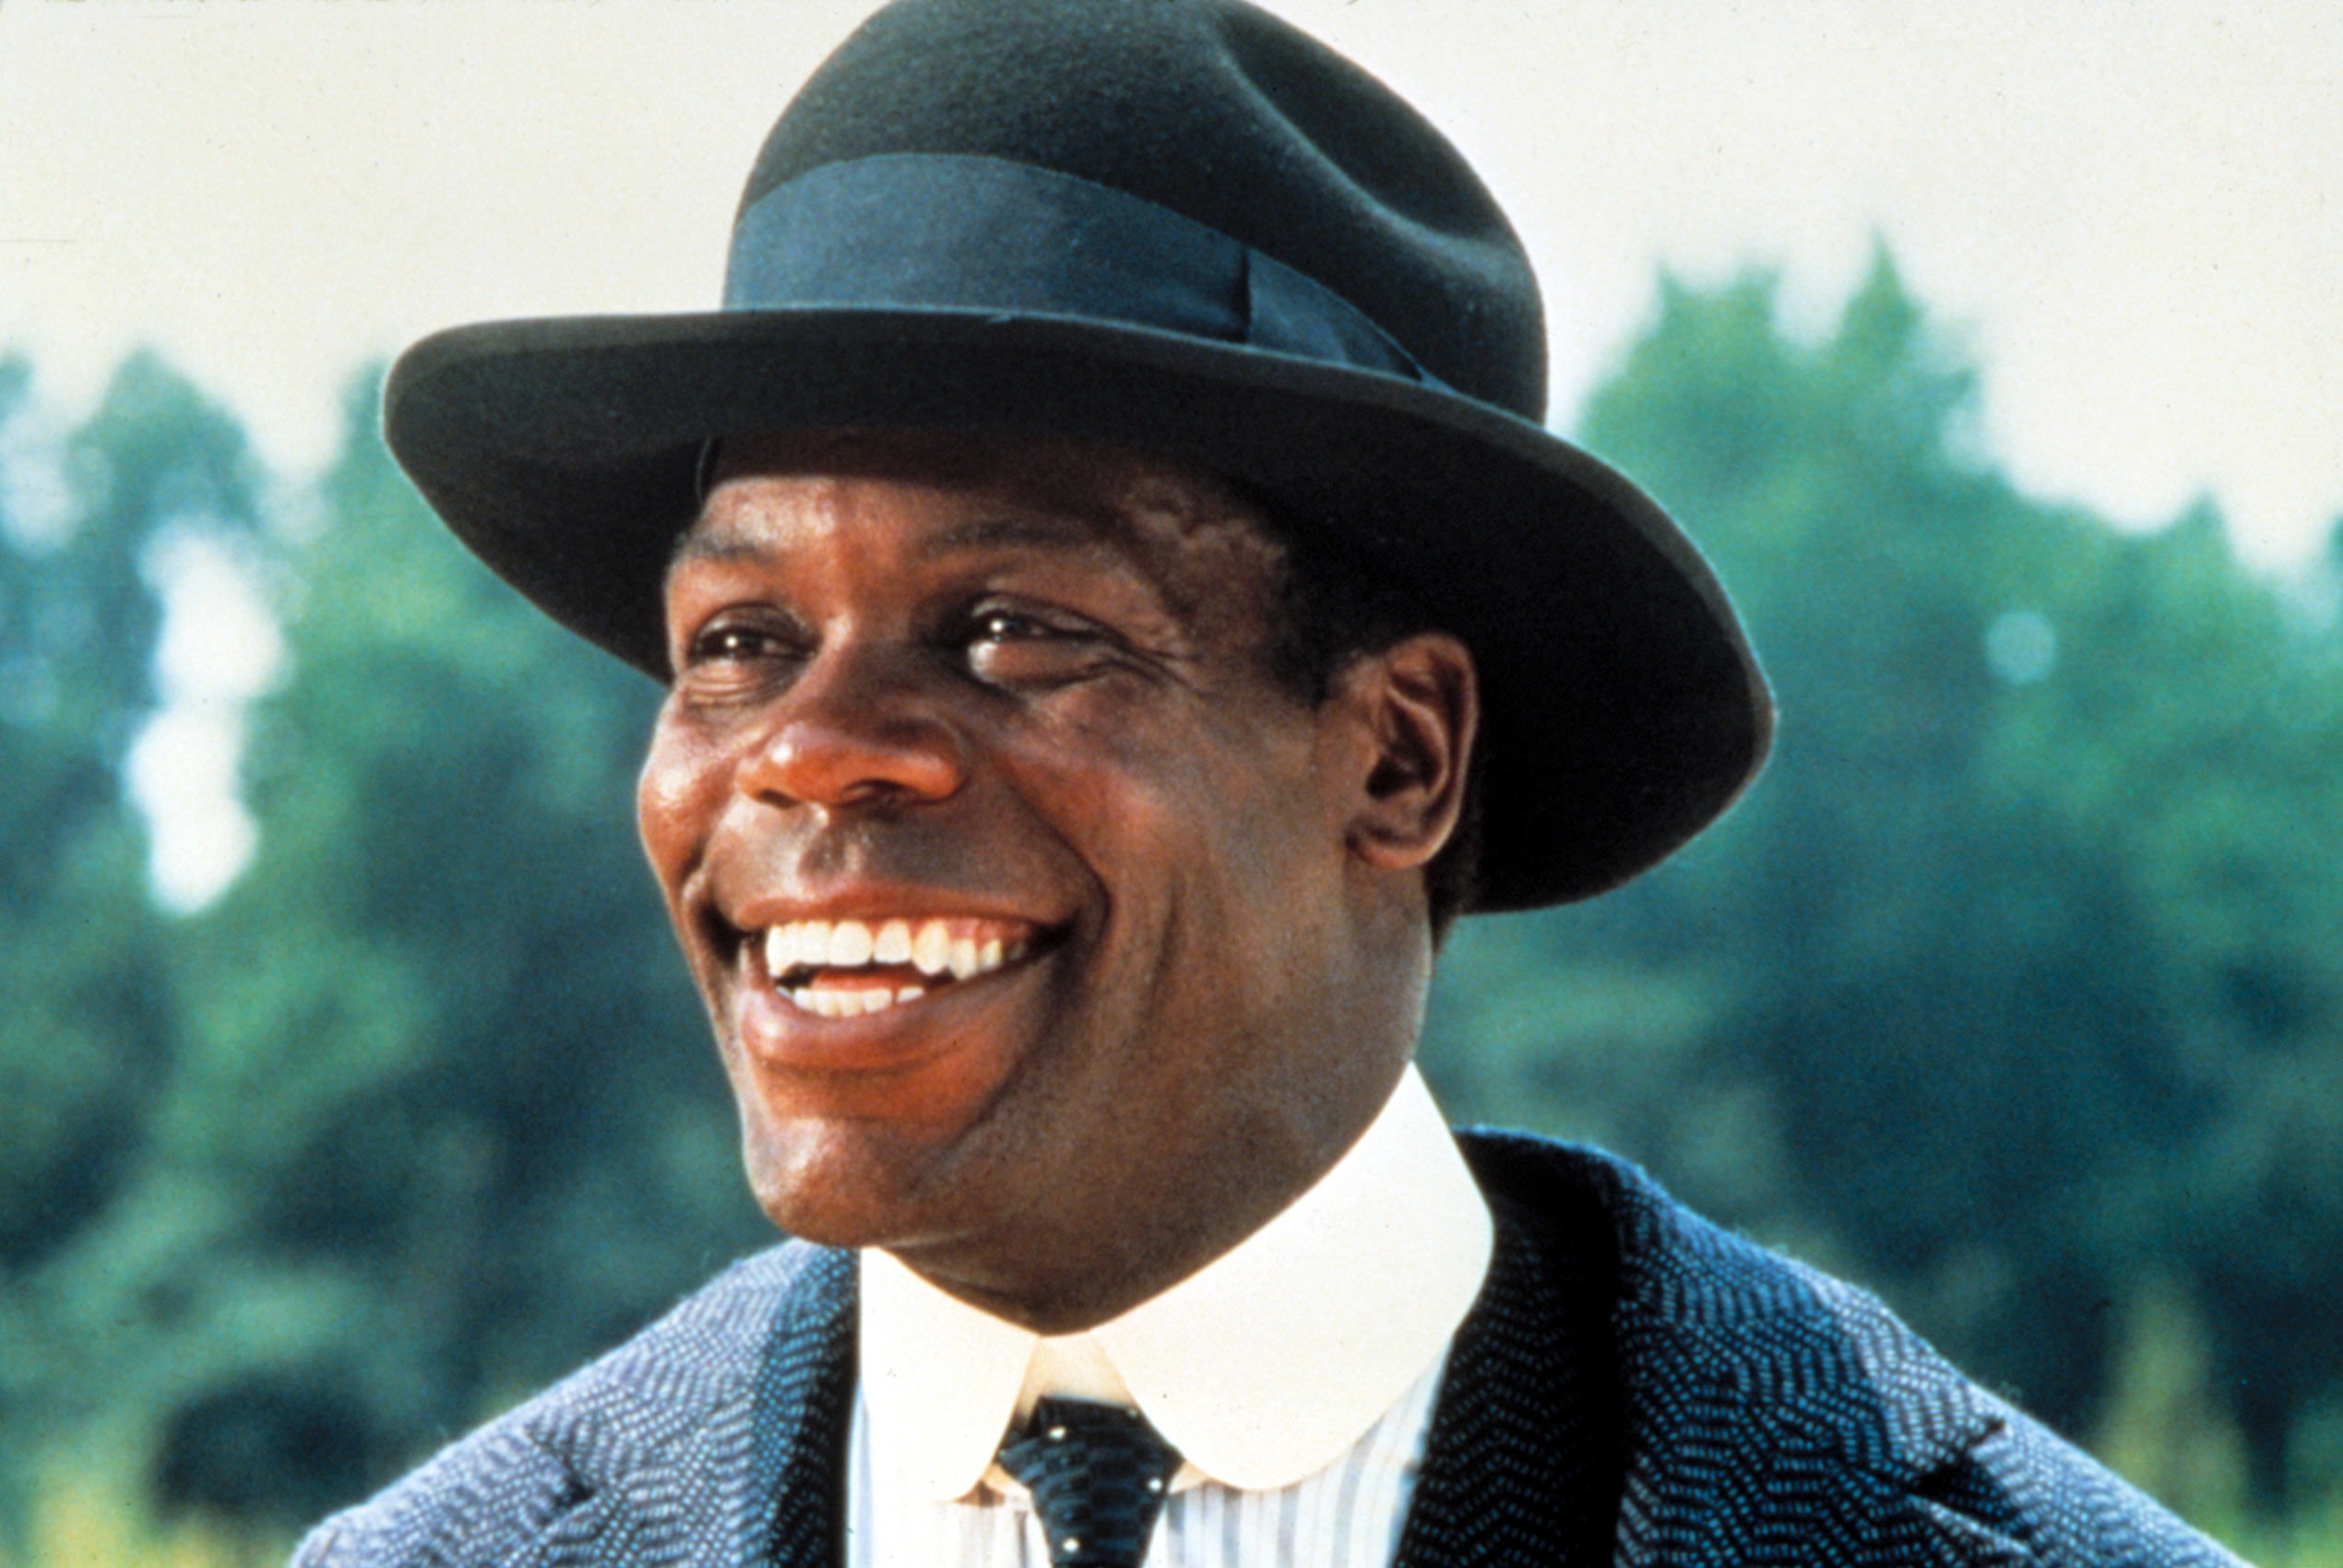 Danny Glover smiling, wearing a hat, a white shirt, a tie, and a textured jacket